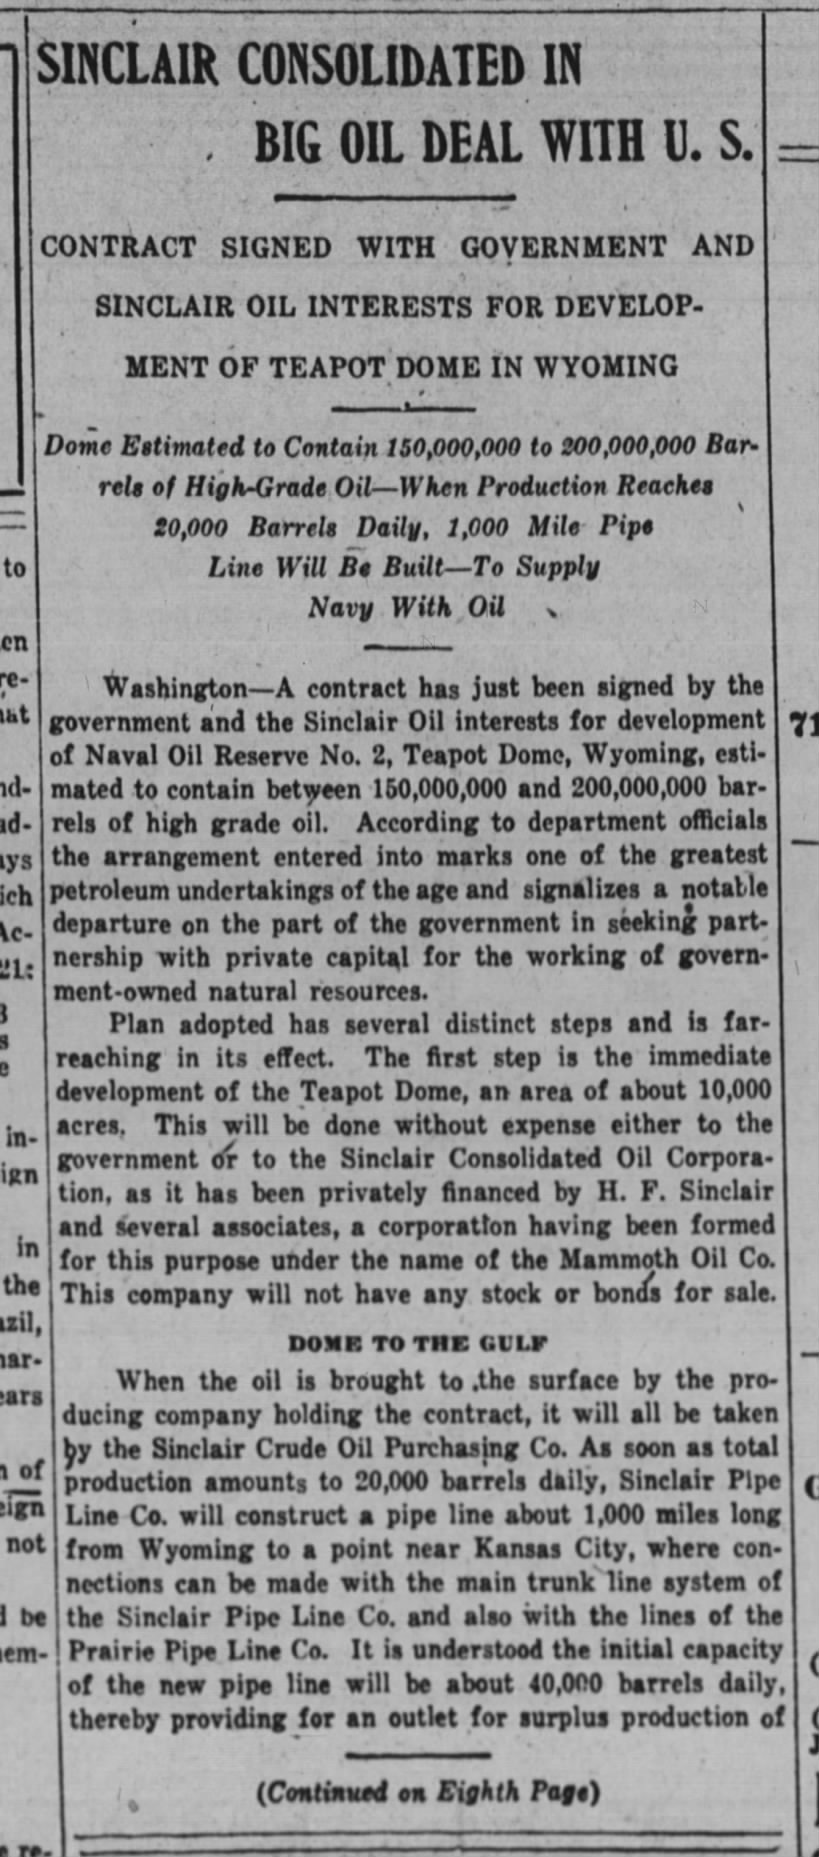 Wall Street Journal reports on Sinclair Oil being given government contract to develop Teapot Dome